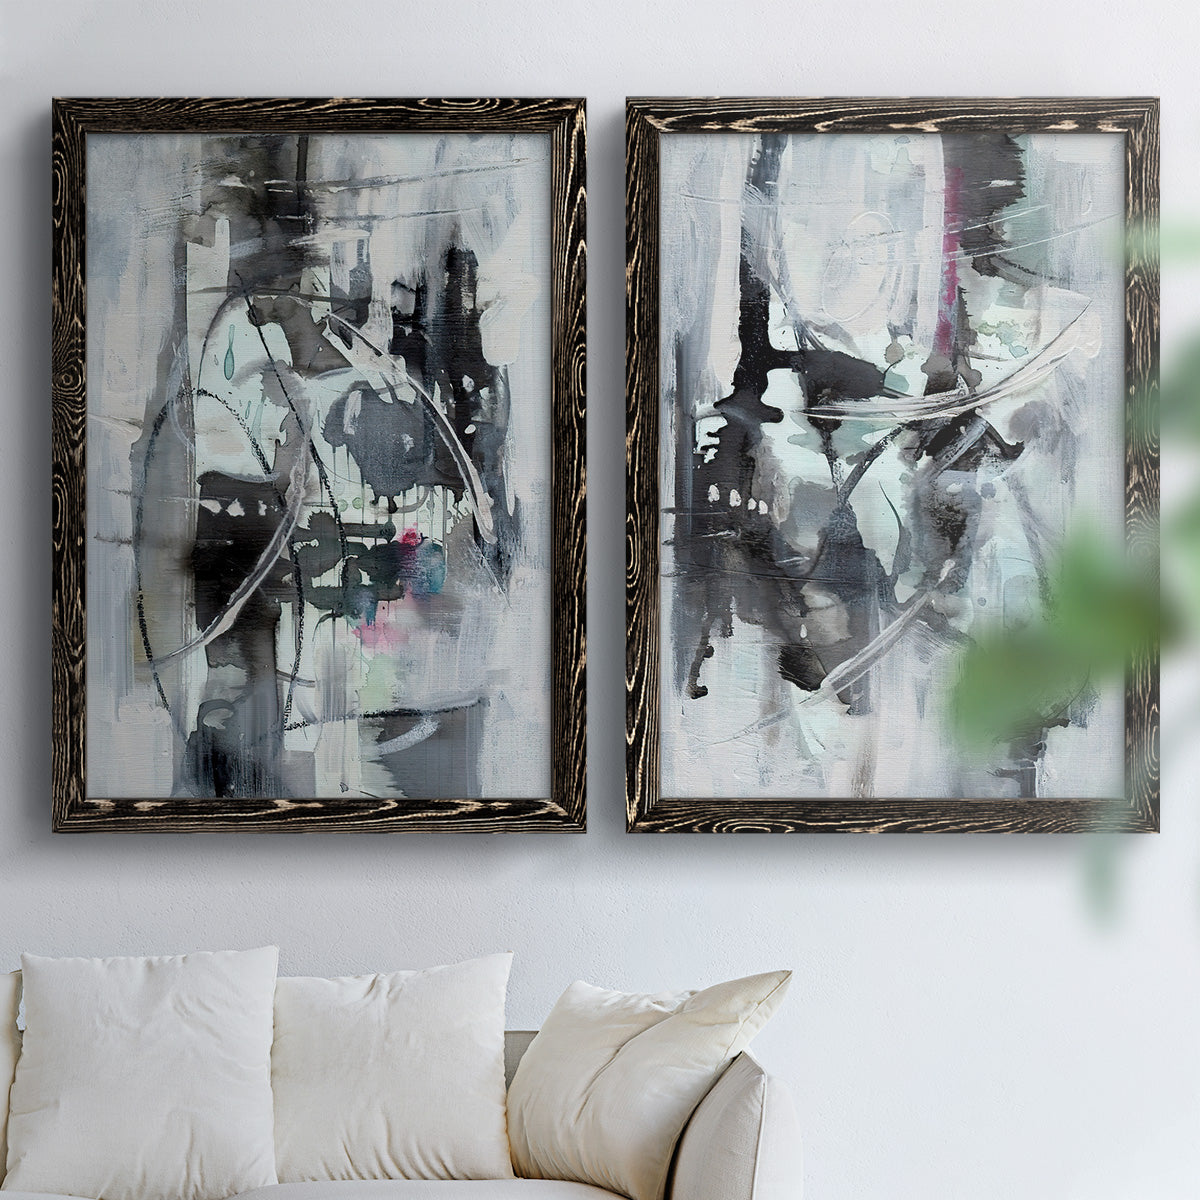 Indian Lore I - Premium Framed Canvas 2 Piece Set - Ready to Hang